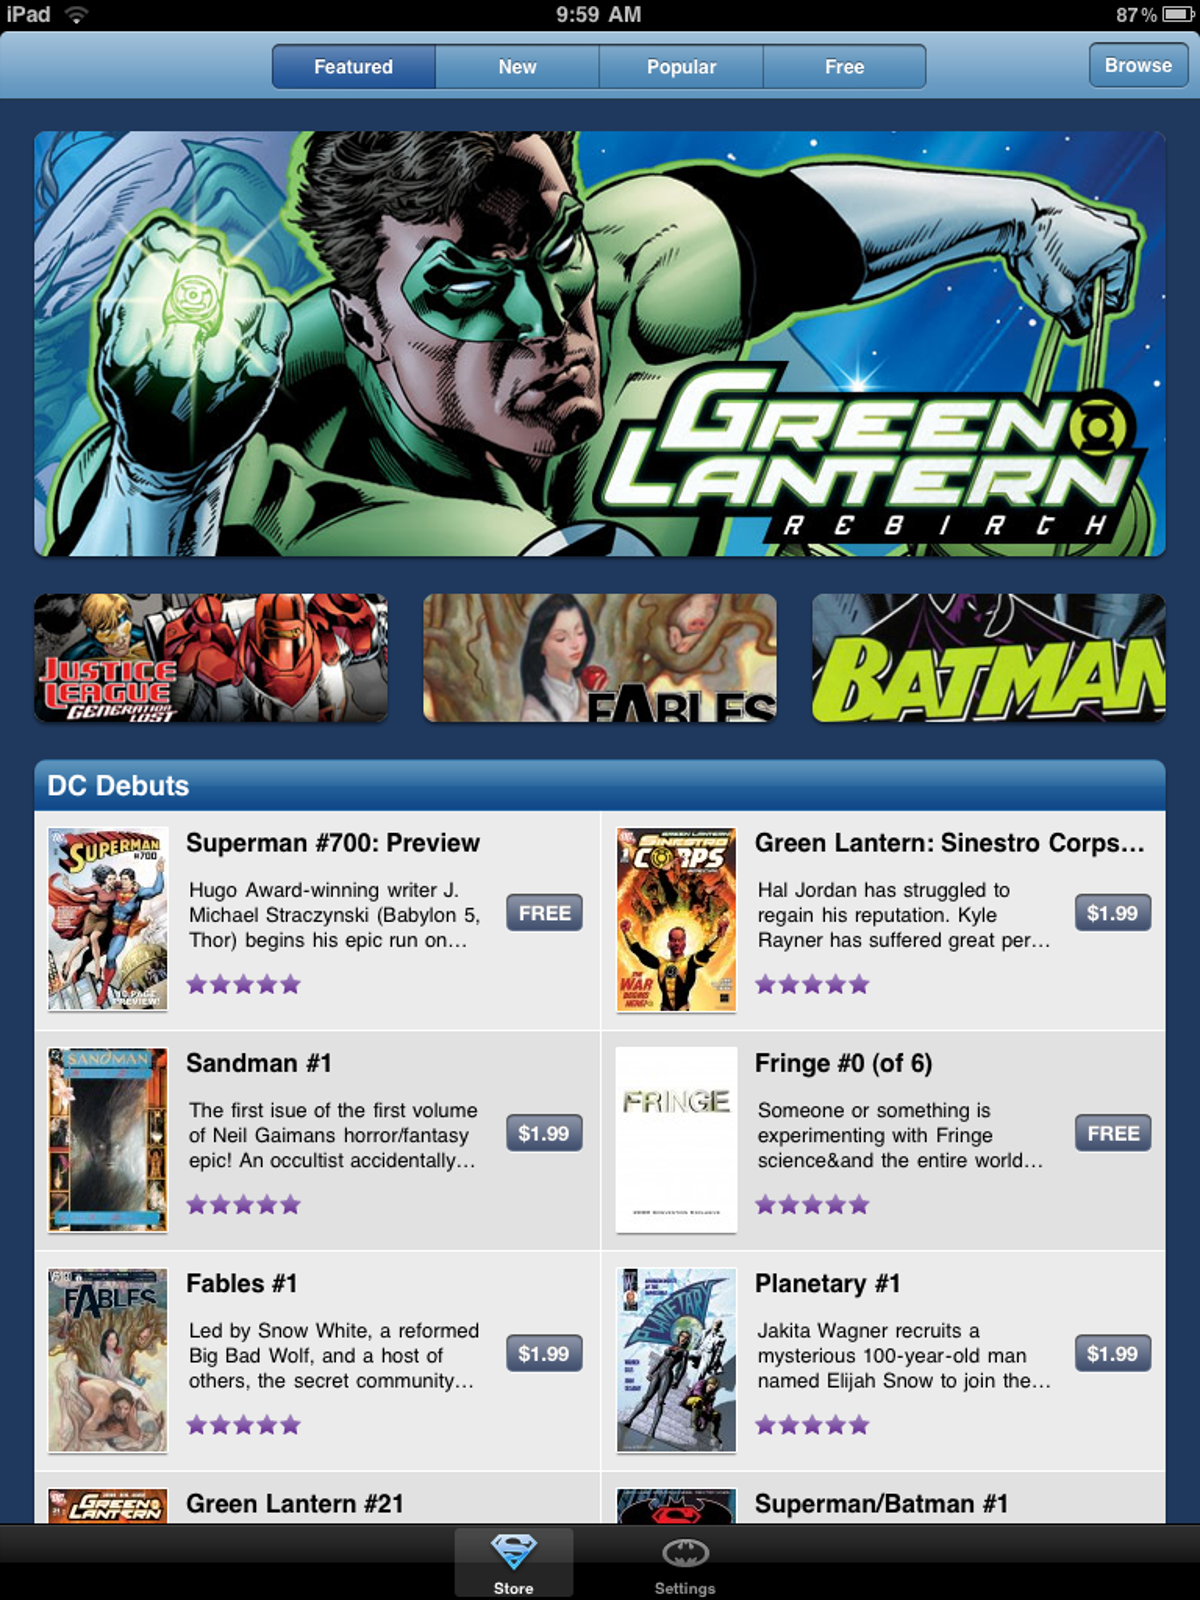 Readers will see this landing page when they launch the free DC Comics iPad app.